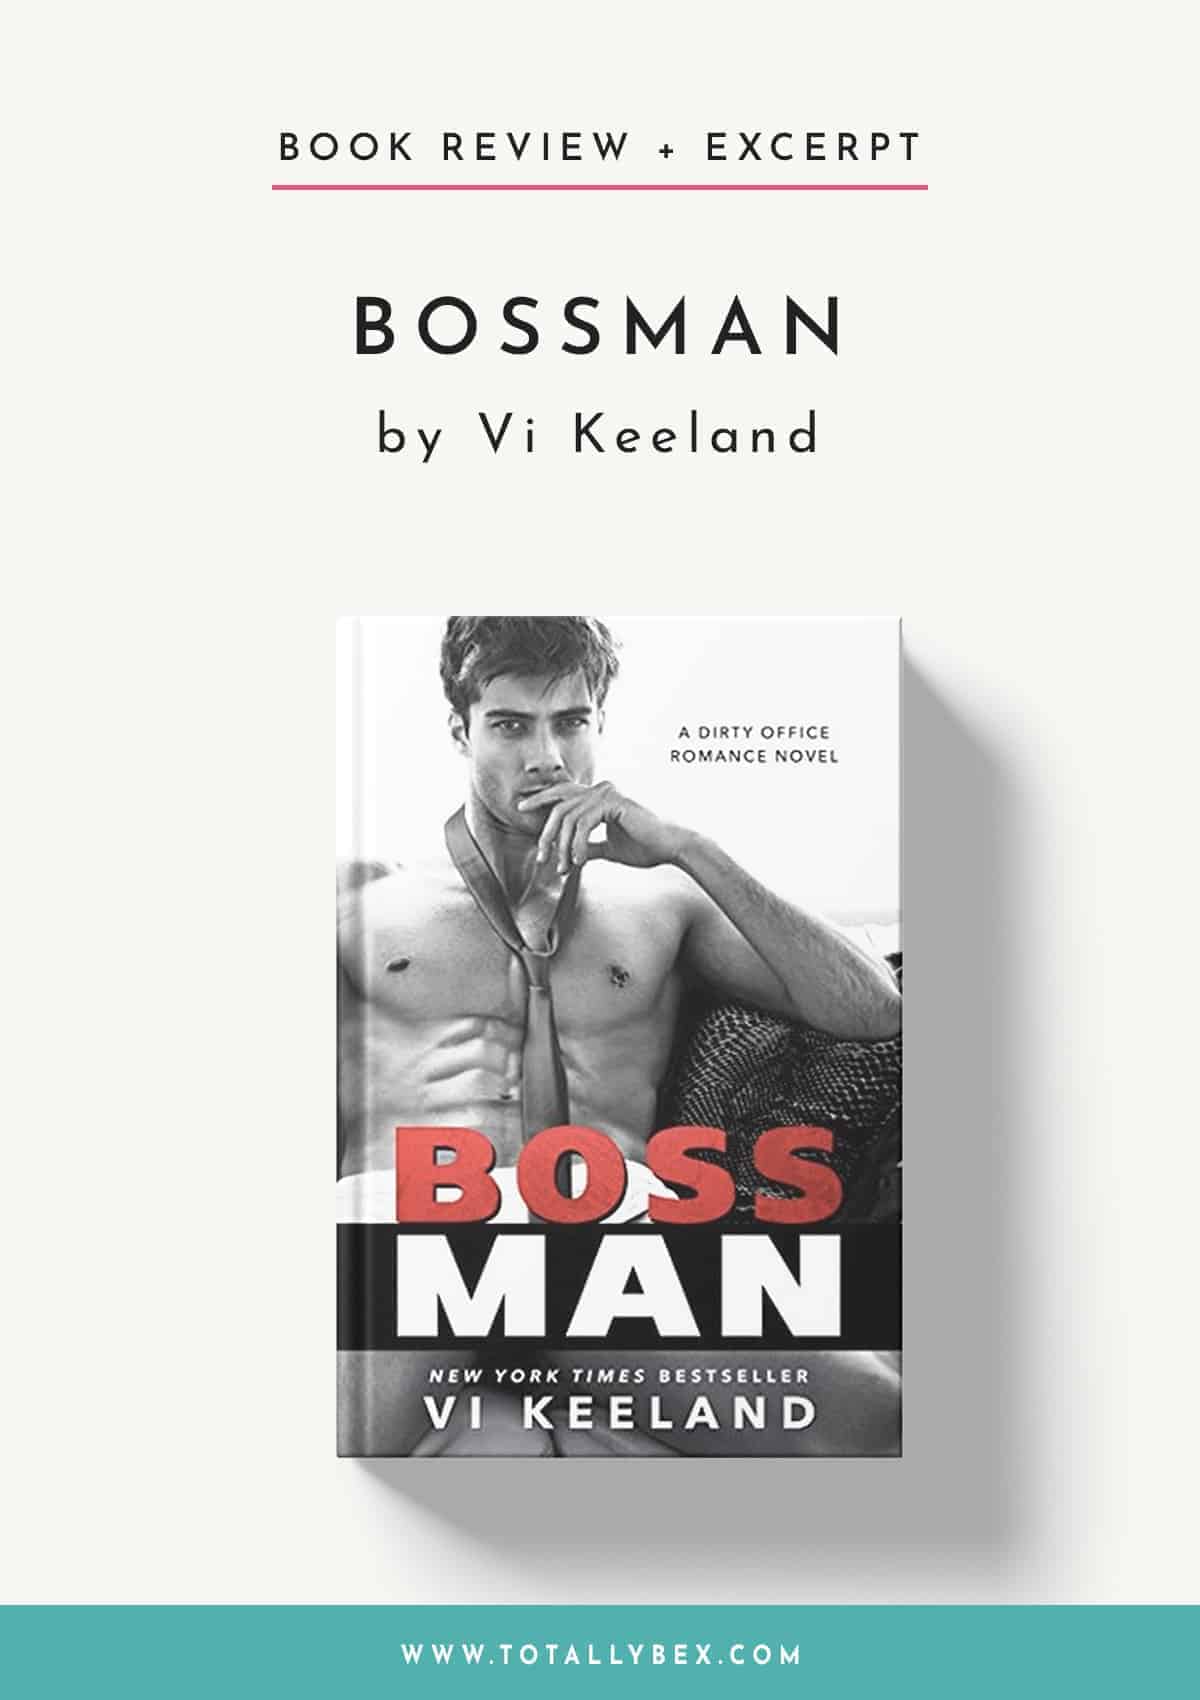 Bossman by Vi Keeland-Book Review+Excerpt